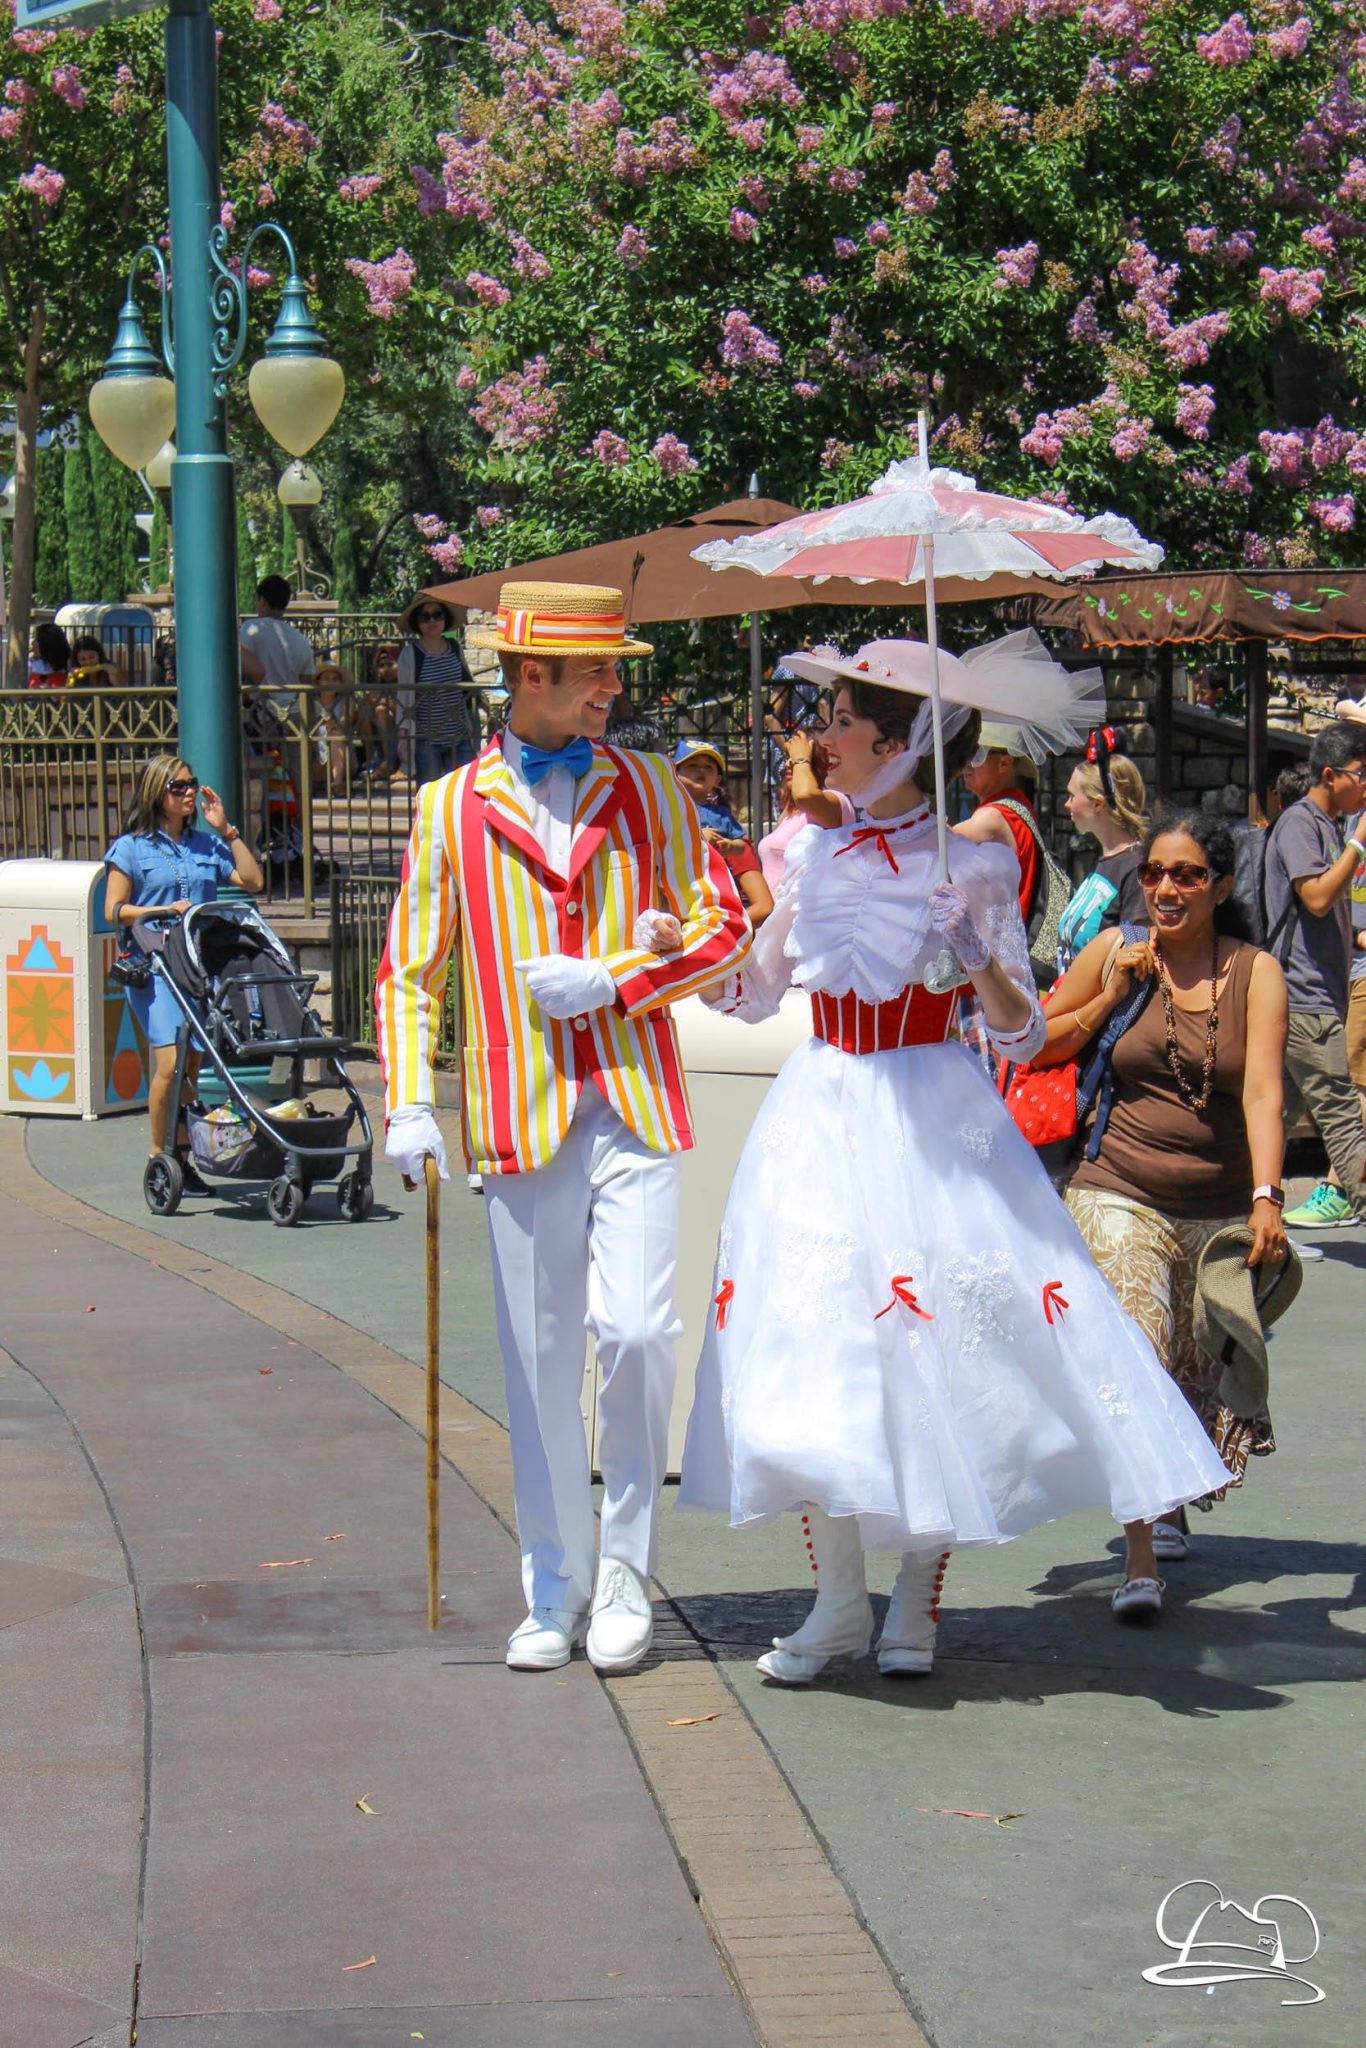 5 Perfect Date Ideas for the Disneyland Resort